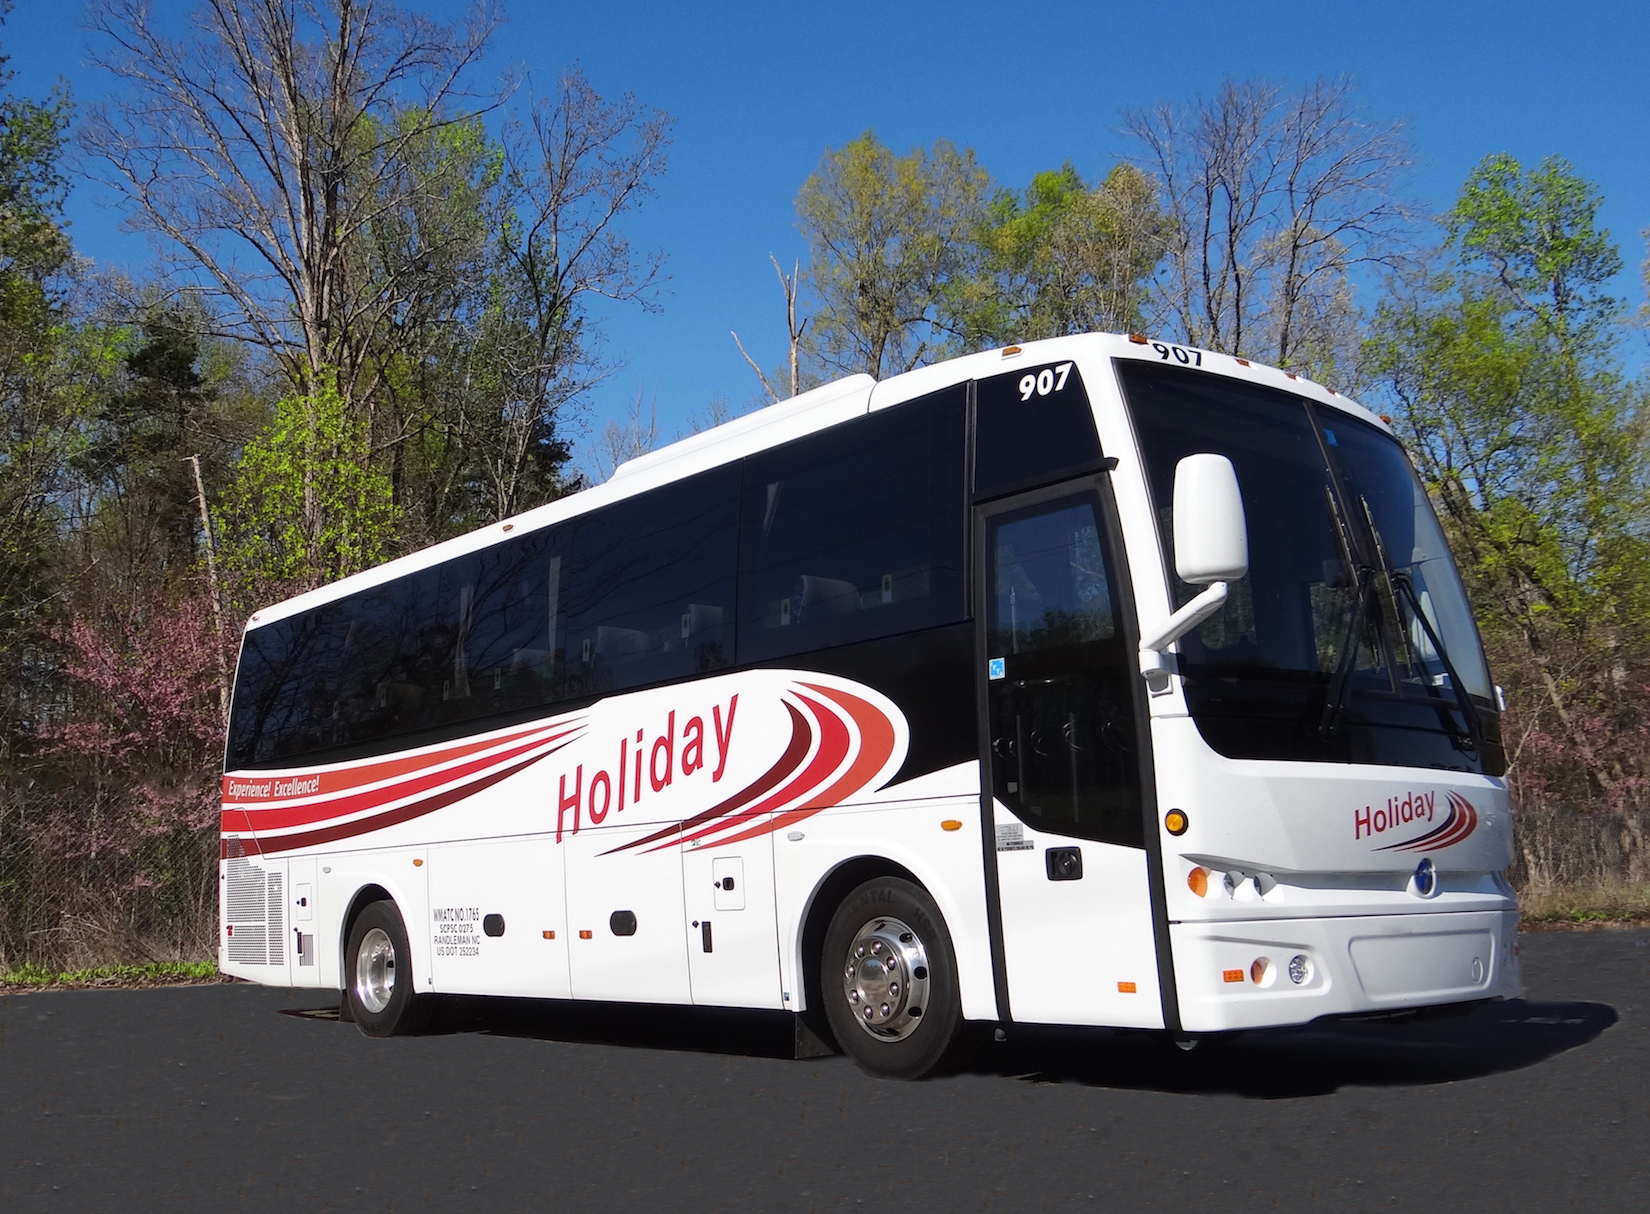 holiday tours bus